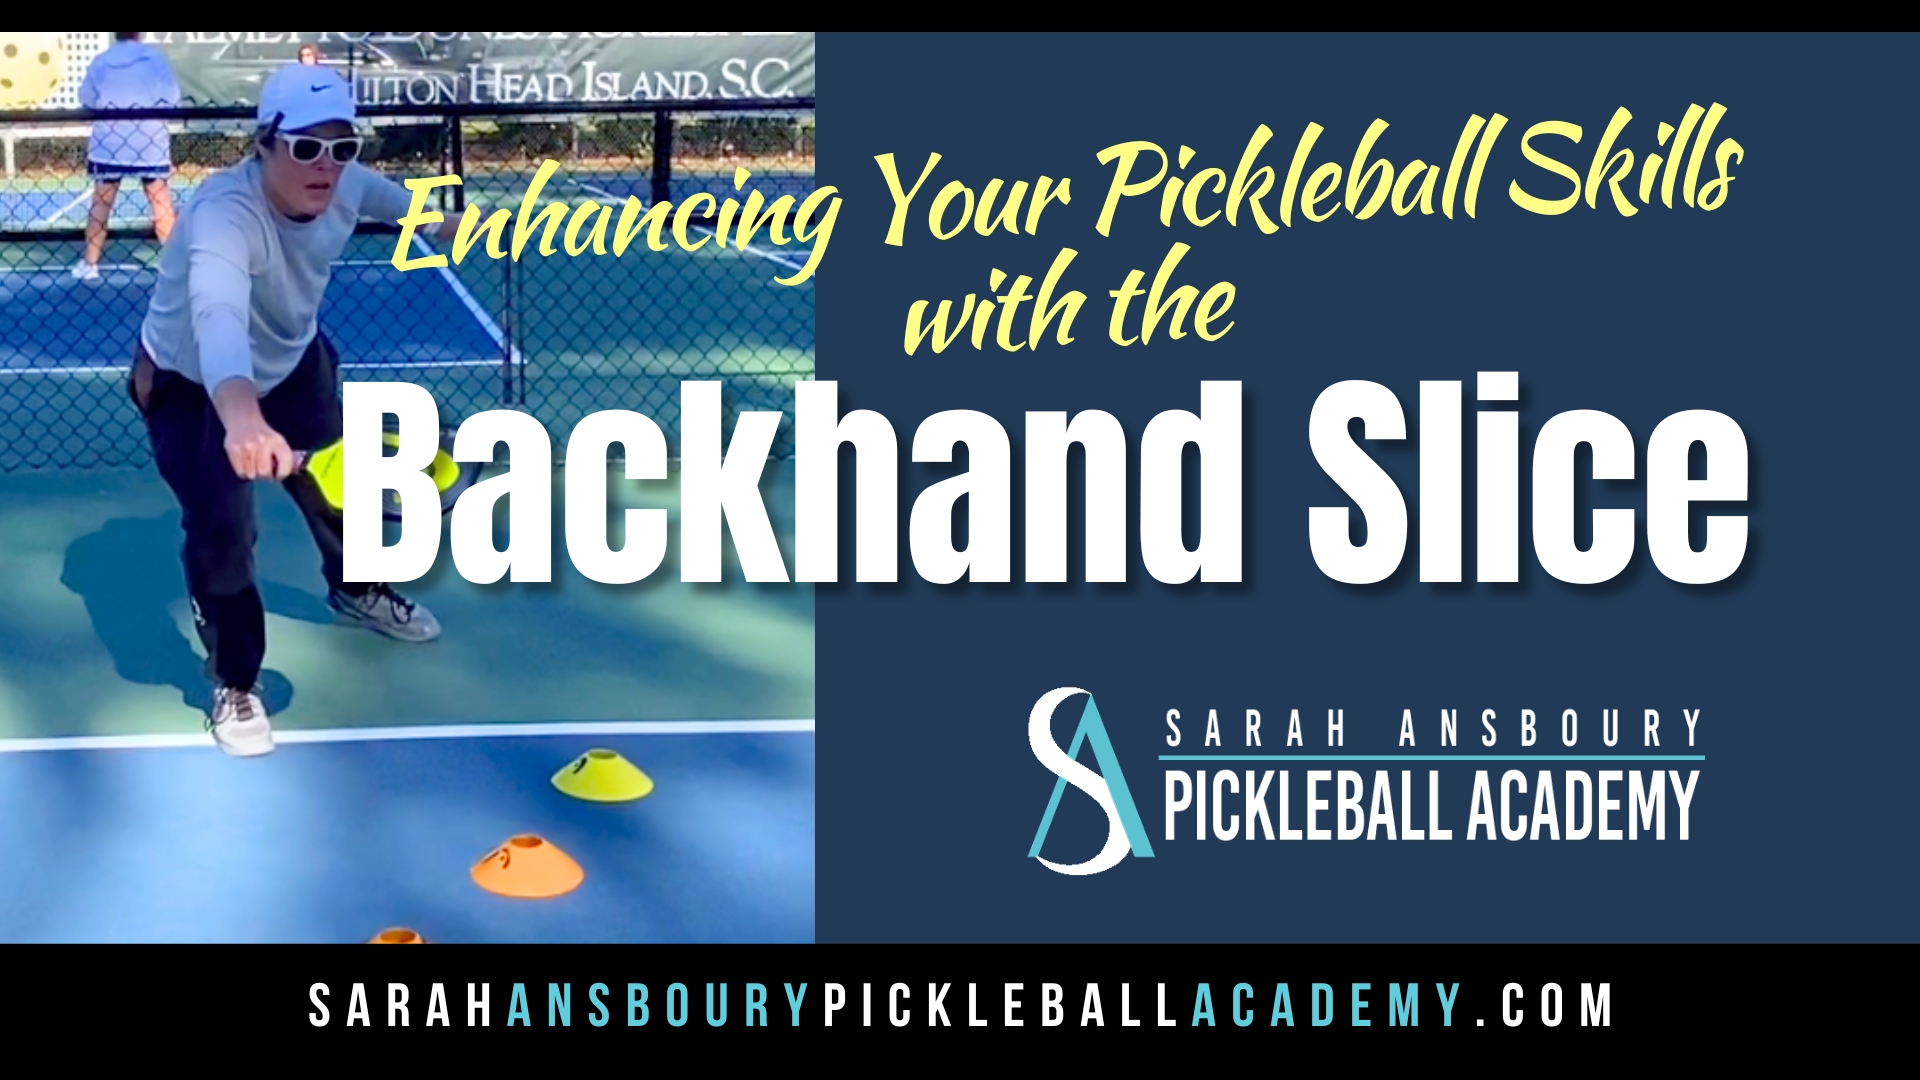 Enhancing Your Pickleball Skills with the Backhand Slice